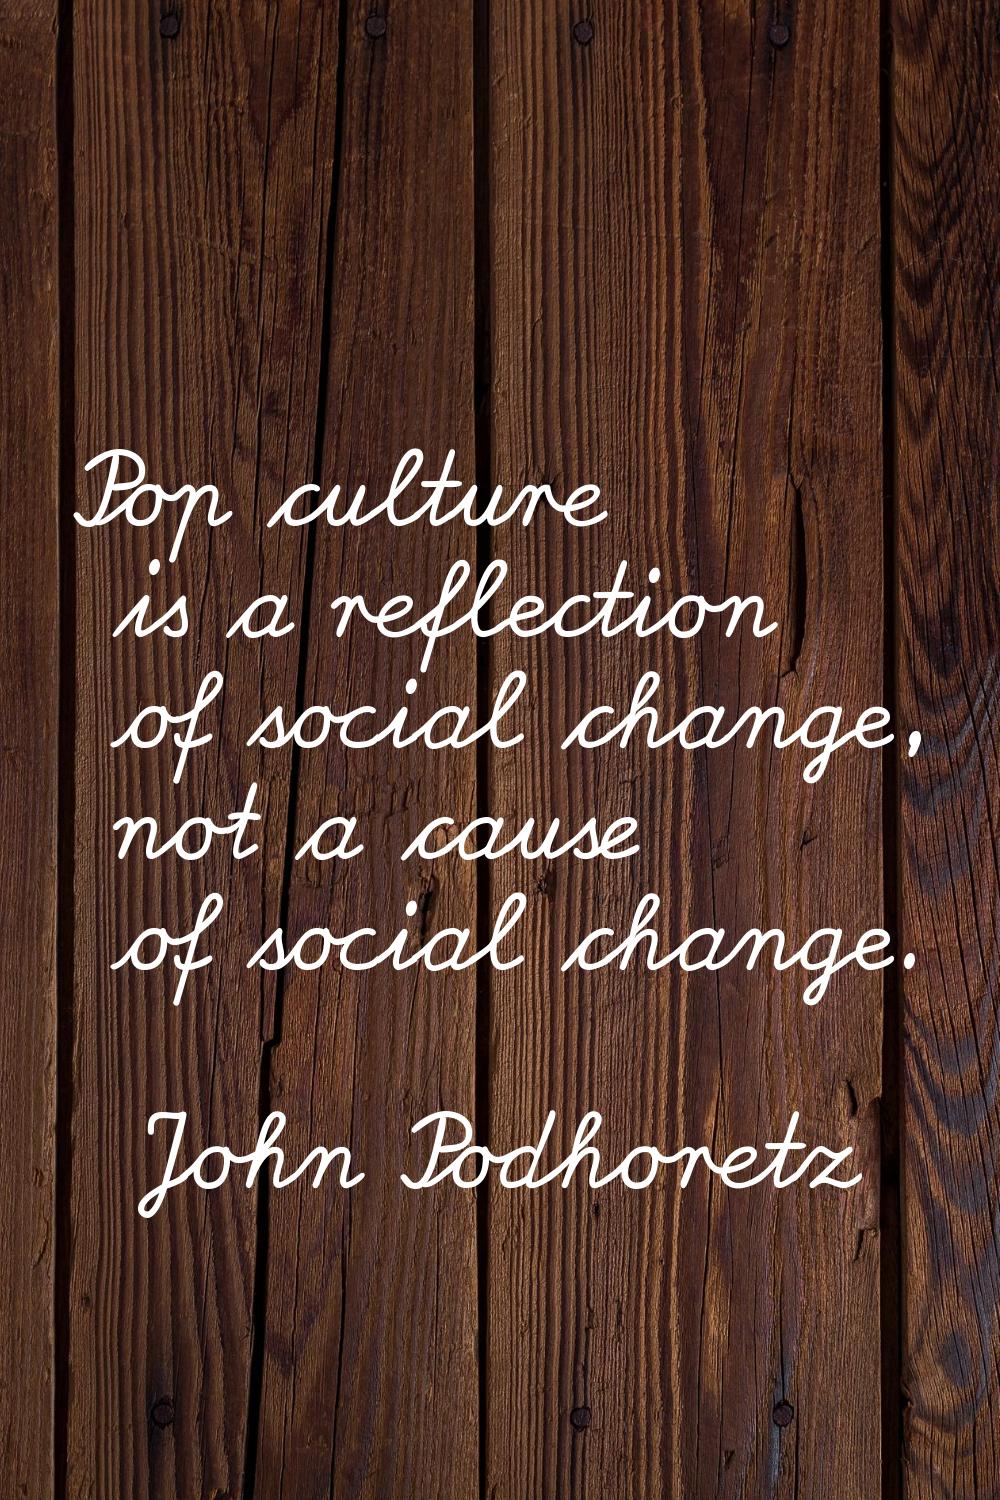 Pop culture is a reflection of social change, not a cause of social change.